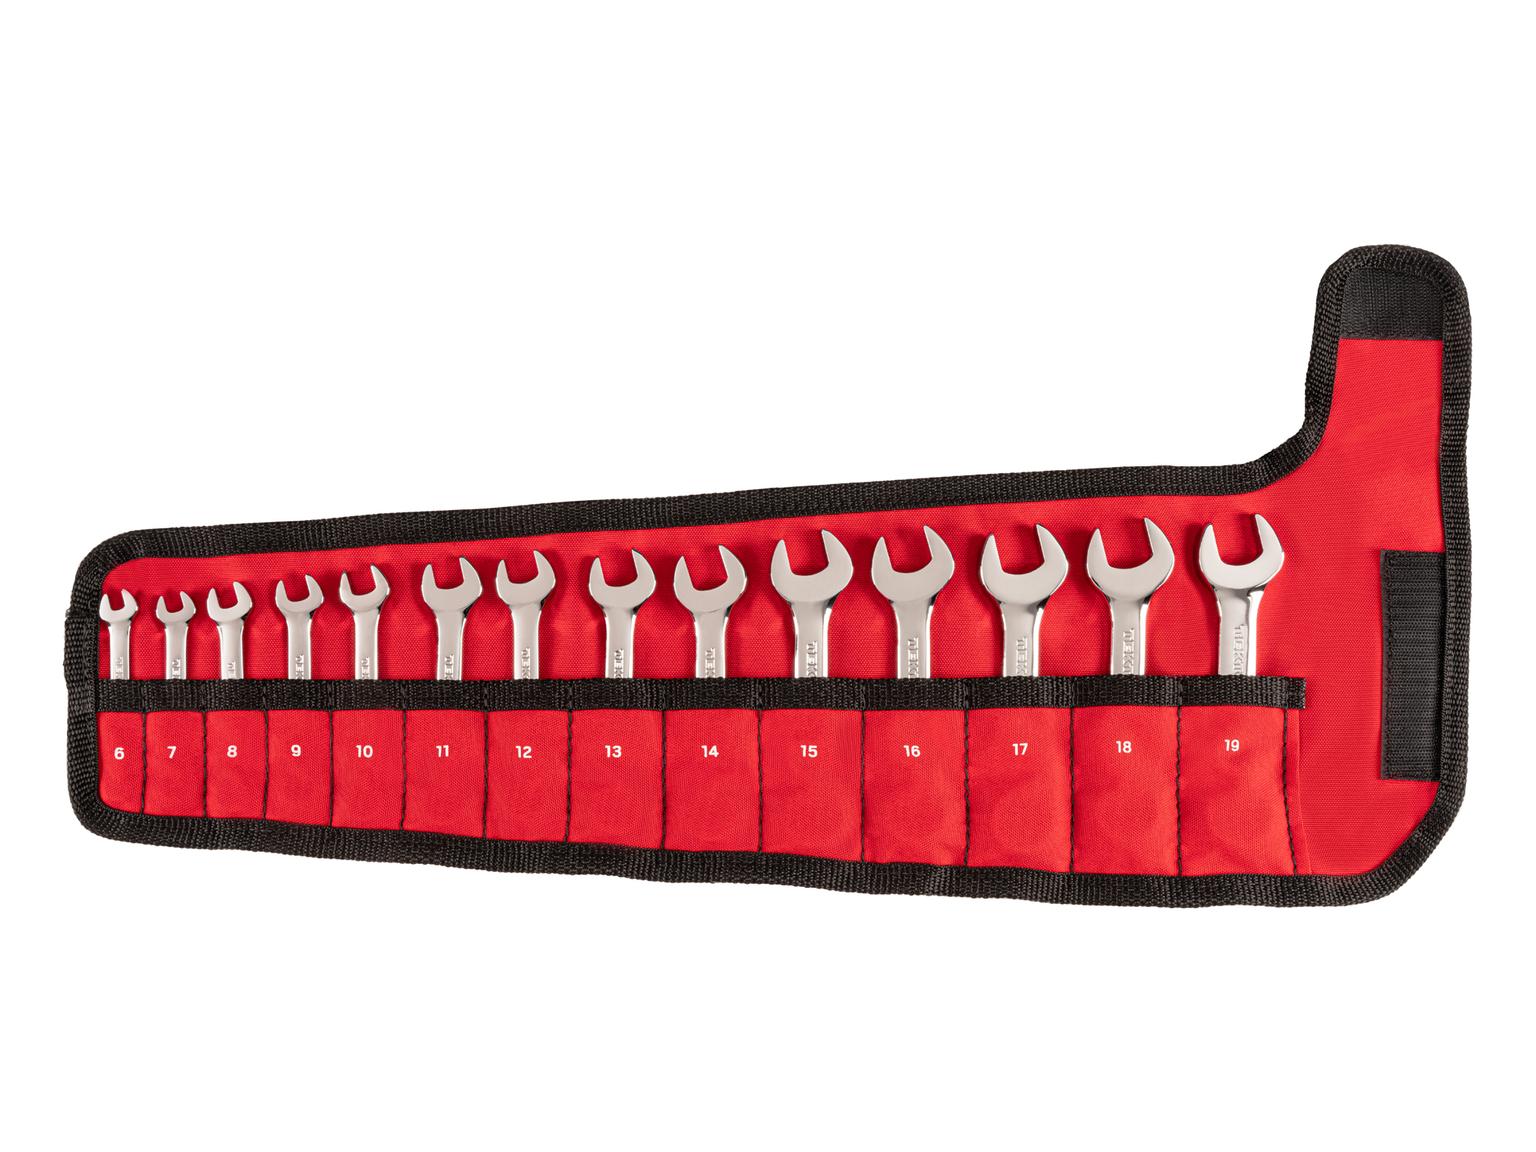 TEKTON WCB94402-T Stubby Combination Wrench Set with Pouch, 14-Piece (6 - 19 mm)